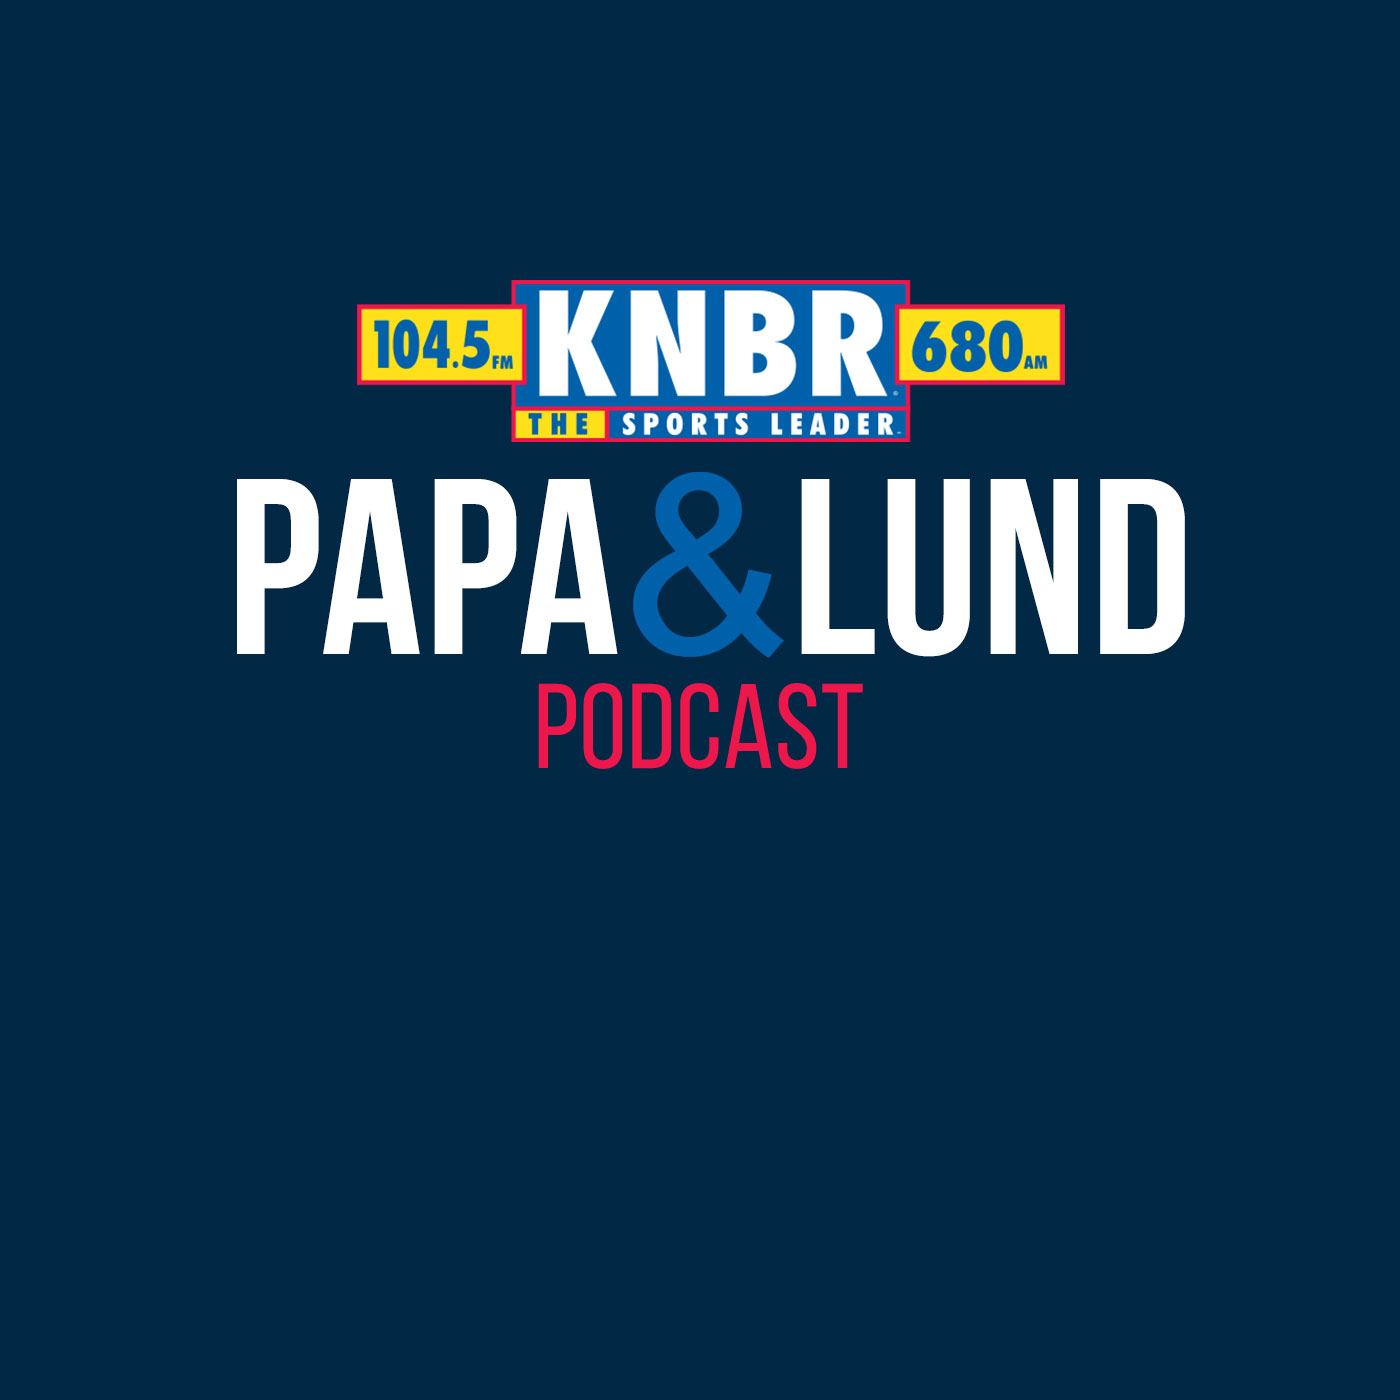 4-5 John Shea and Ann Killion join Papa & Lund to discuss Farhan's off season moves and the evolution of the MLB front office